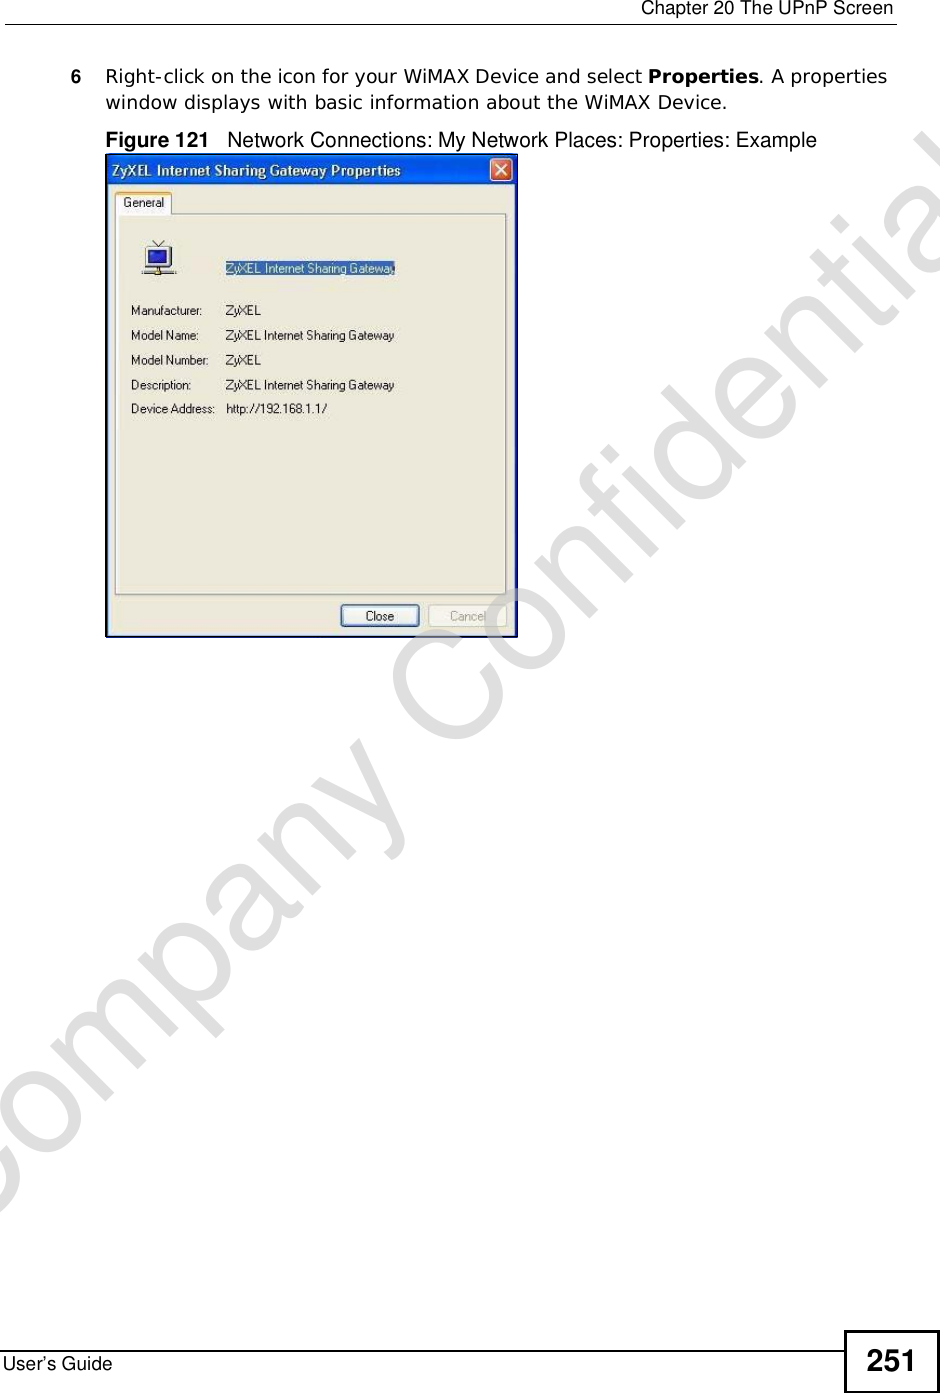  Chapter 20The UPnP ScreenUser’s Guide 2516Right-click on the icon for your WiMAX Device and select Properties. A properties window displays with basic information about the WiMAX Device. Figure 121   Network Connections: My Network Places: Properties: ExampleCompany Confidential